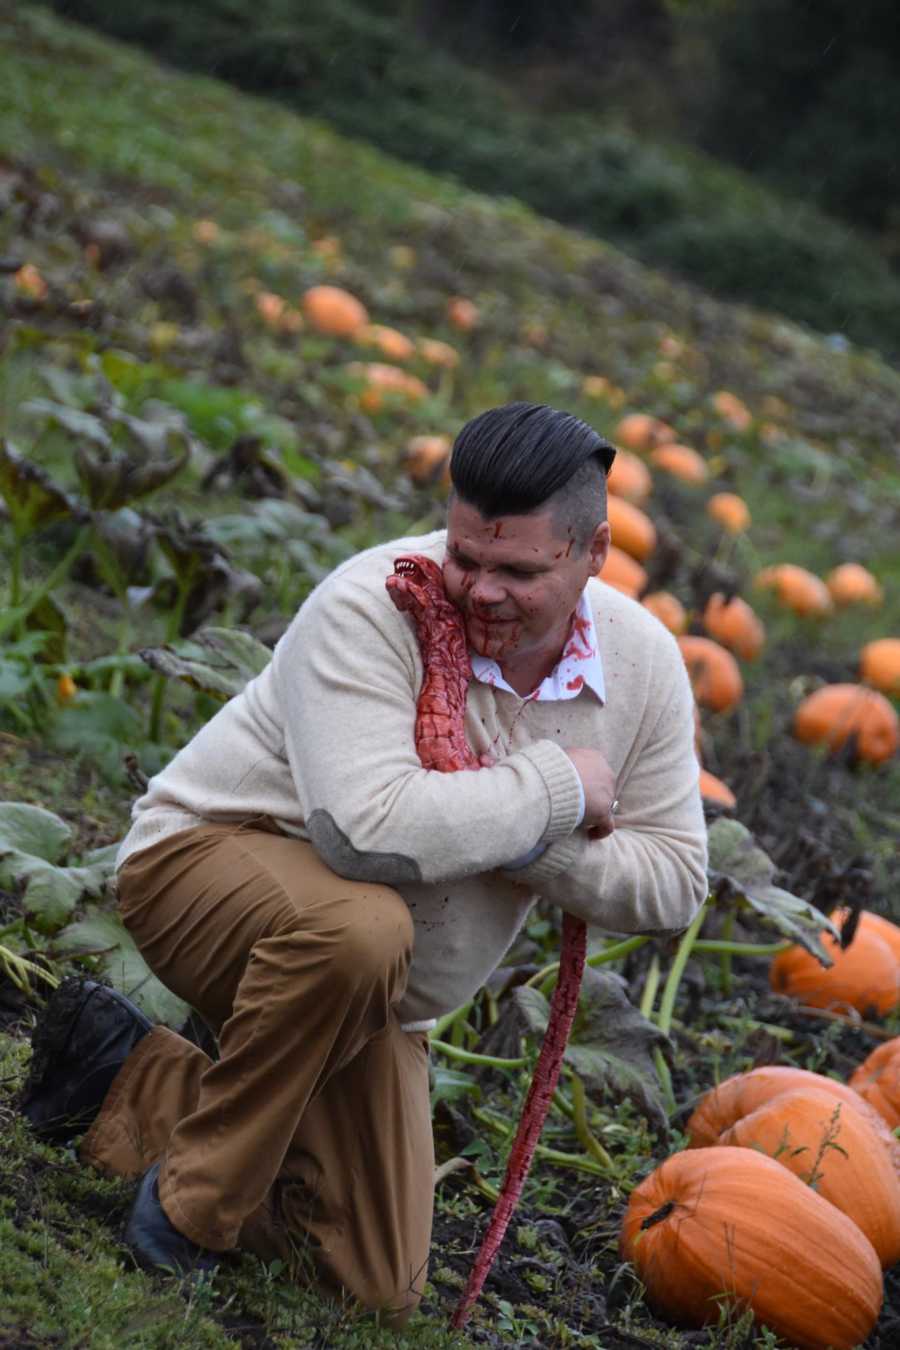 Man smiles as he hugs bloody creature that came out of his wife's stomach in pumpkin patch